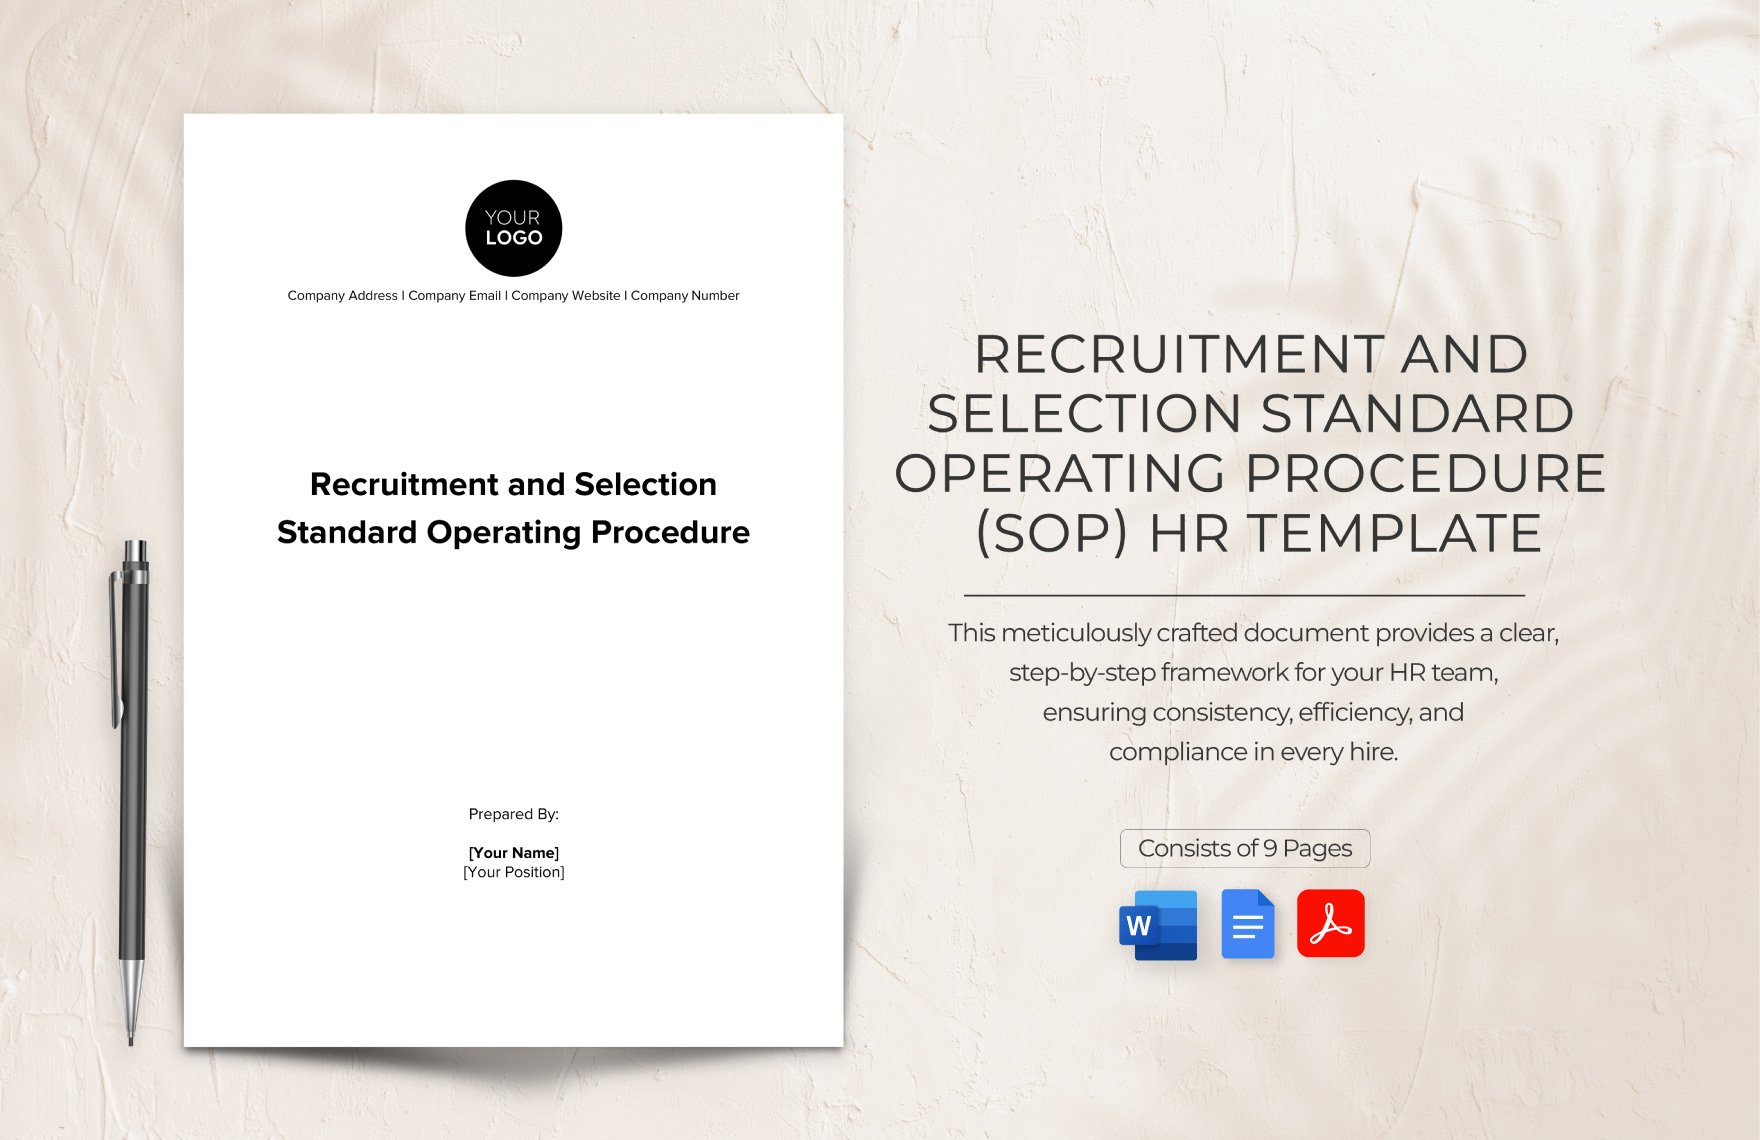 Recruitment and Selection Standard Operating Procedure (SOP) HR Template in Word, Google Docs, PDF